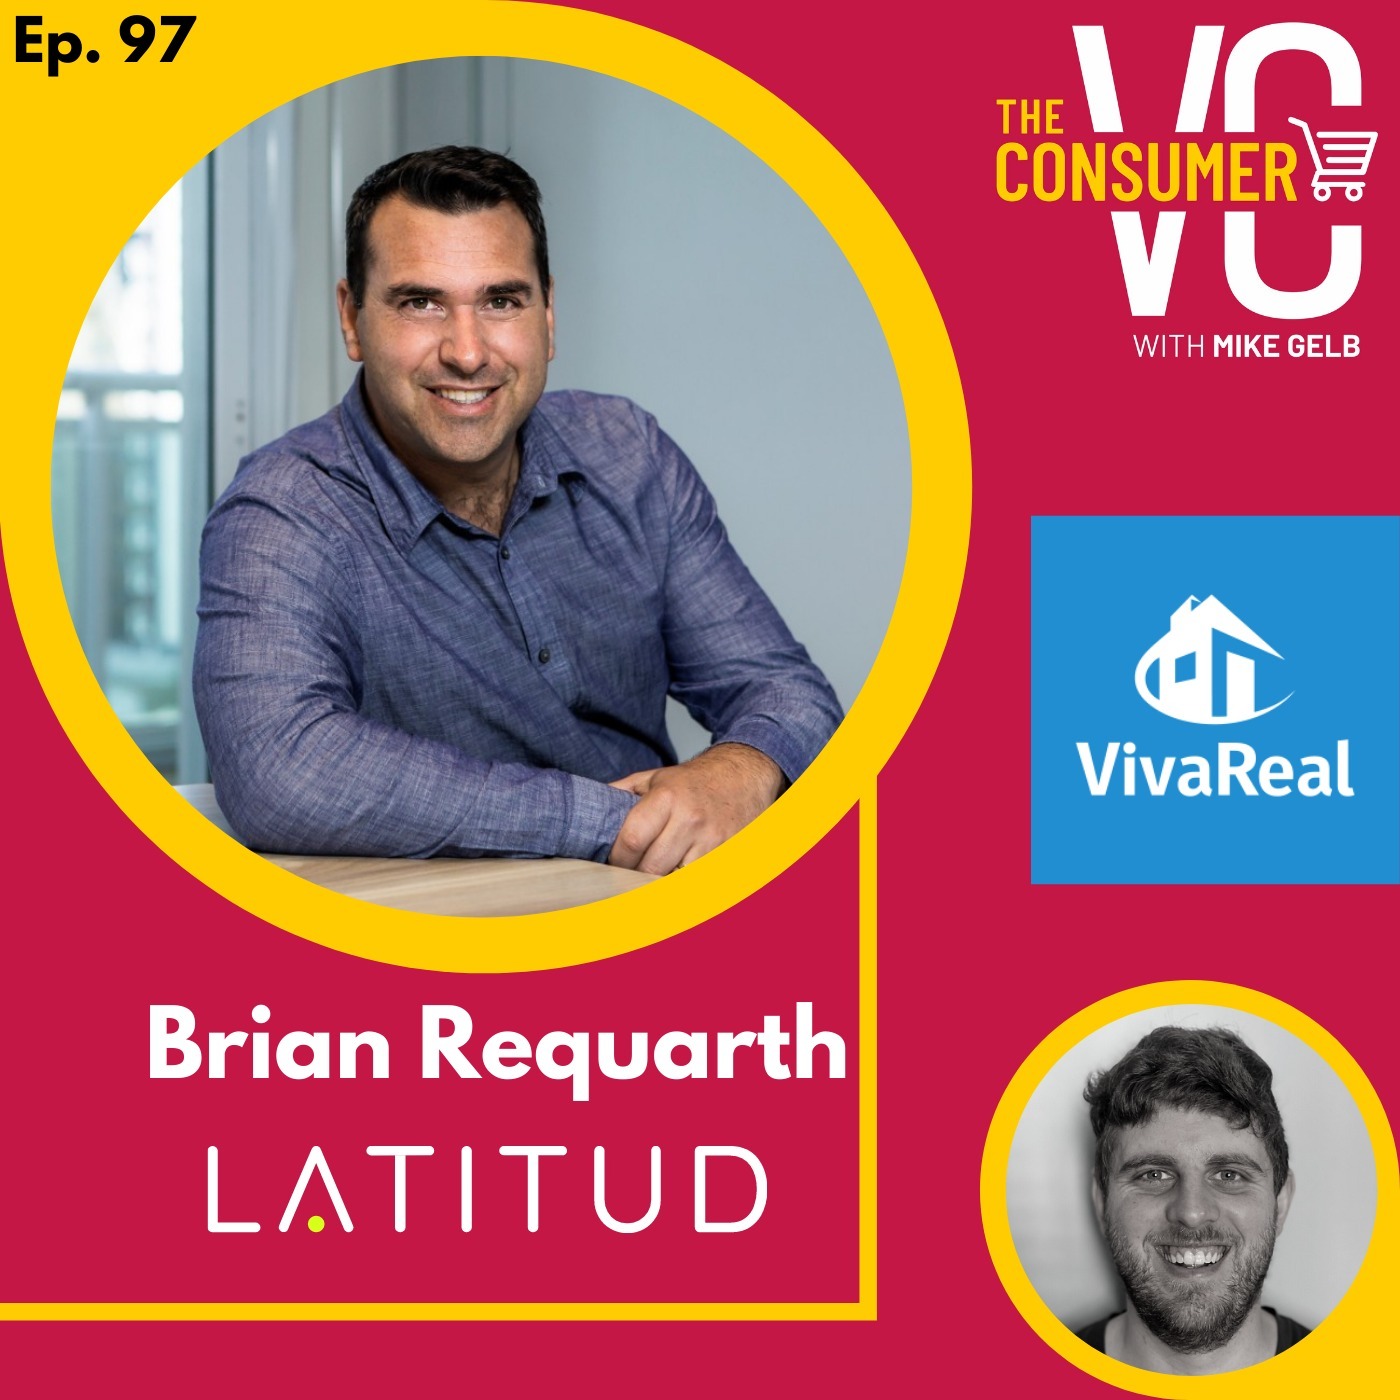 Brian Requarth (Latitud + Viva Real) - Building an Online Real Estate Marketplace in Latin America, Raising Money Without a Network, and Solving Supply vs. Demand